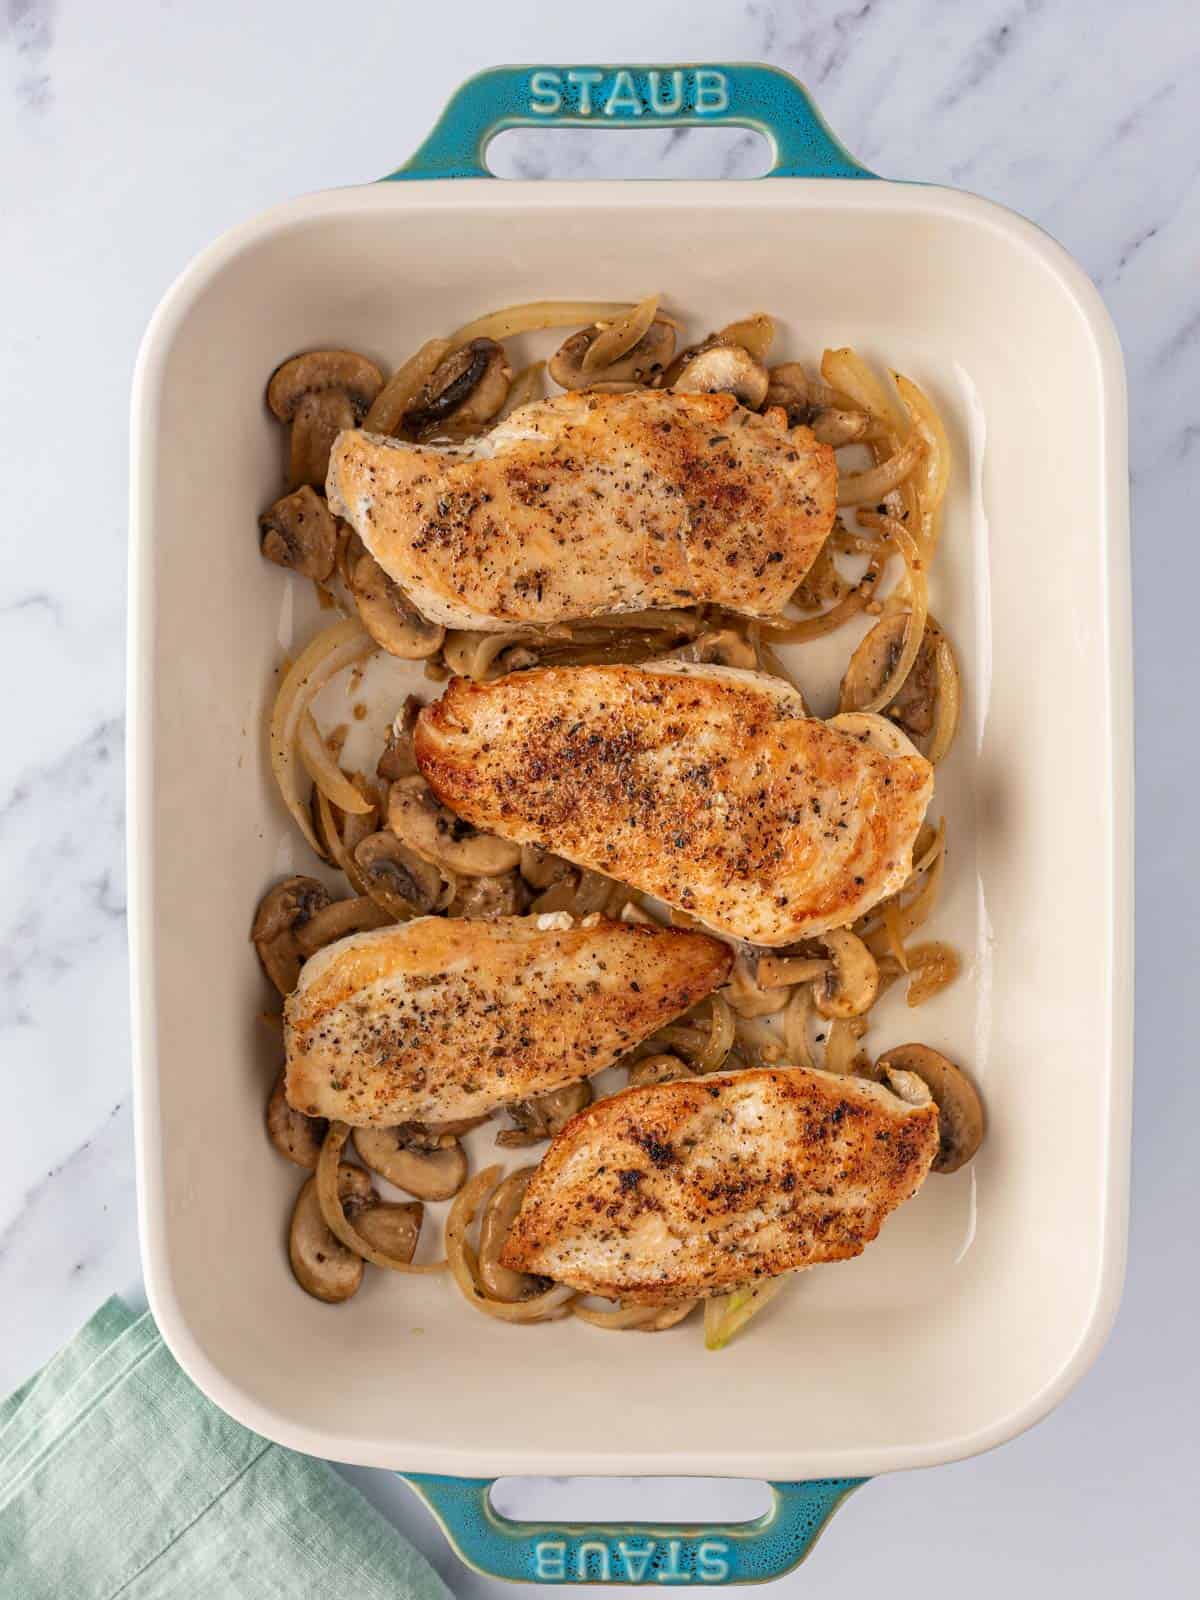 Chicken and mushrooms in a baking dish.